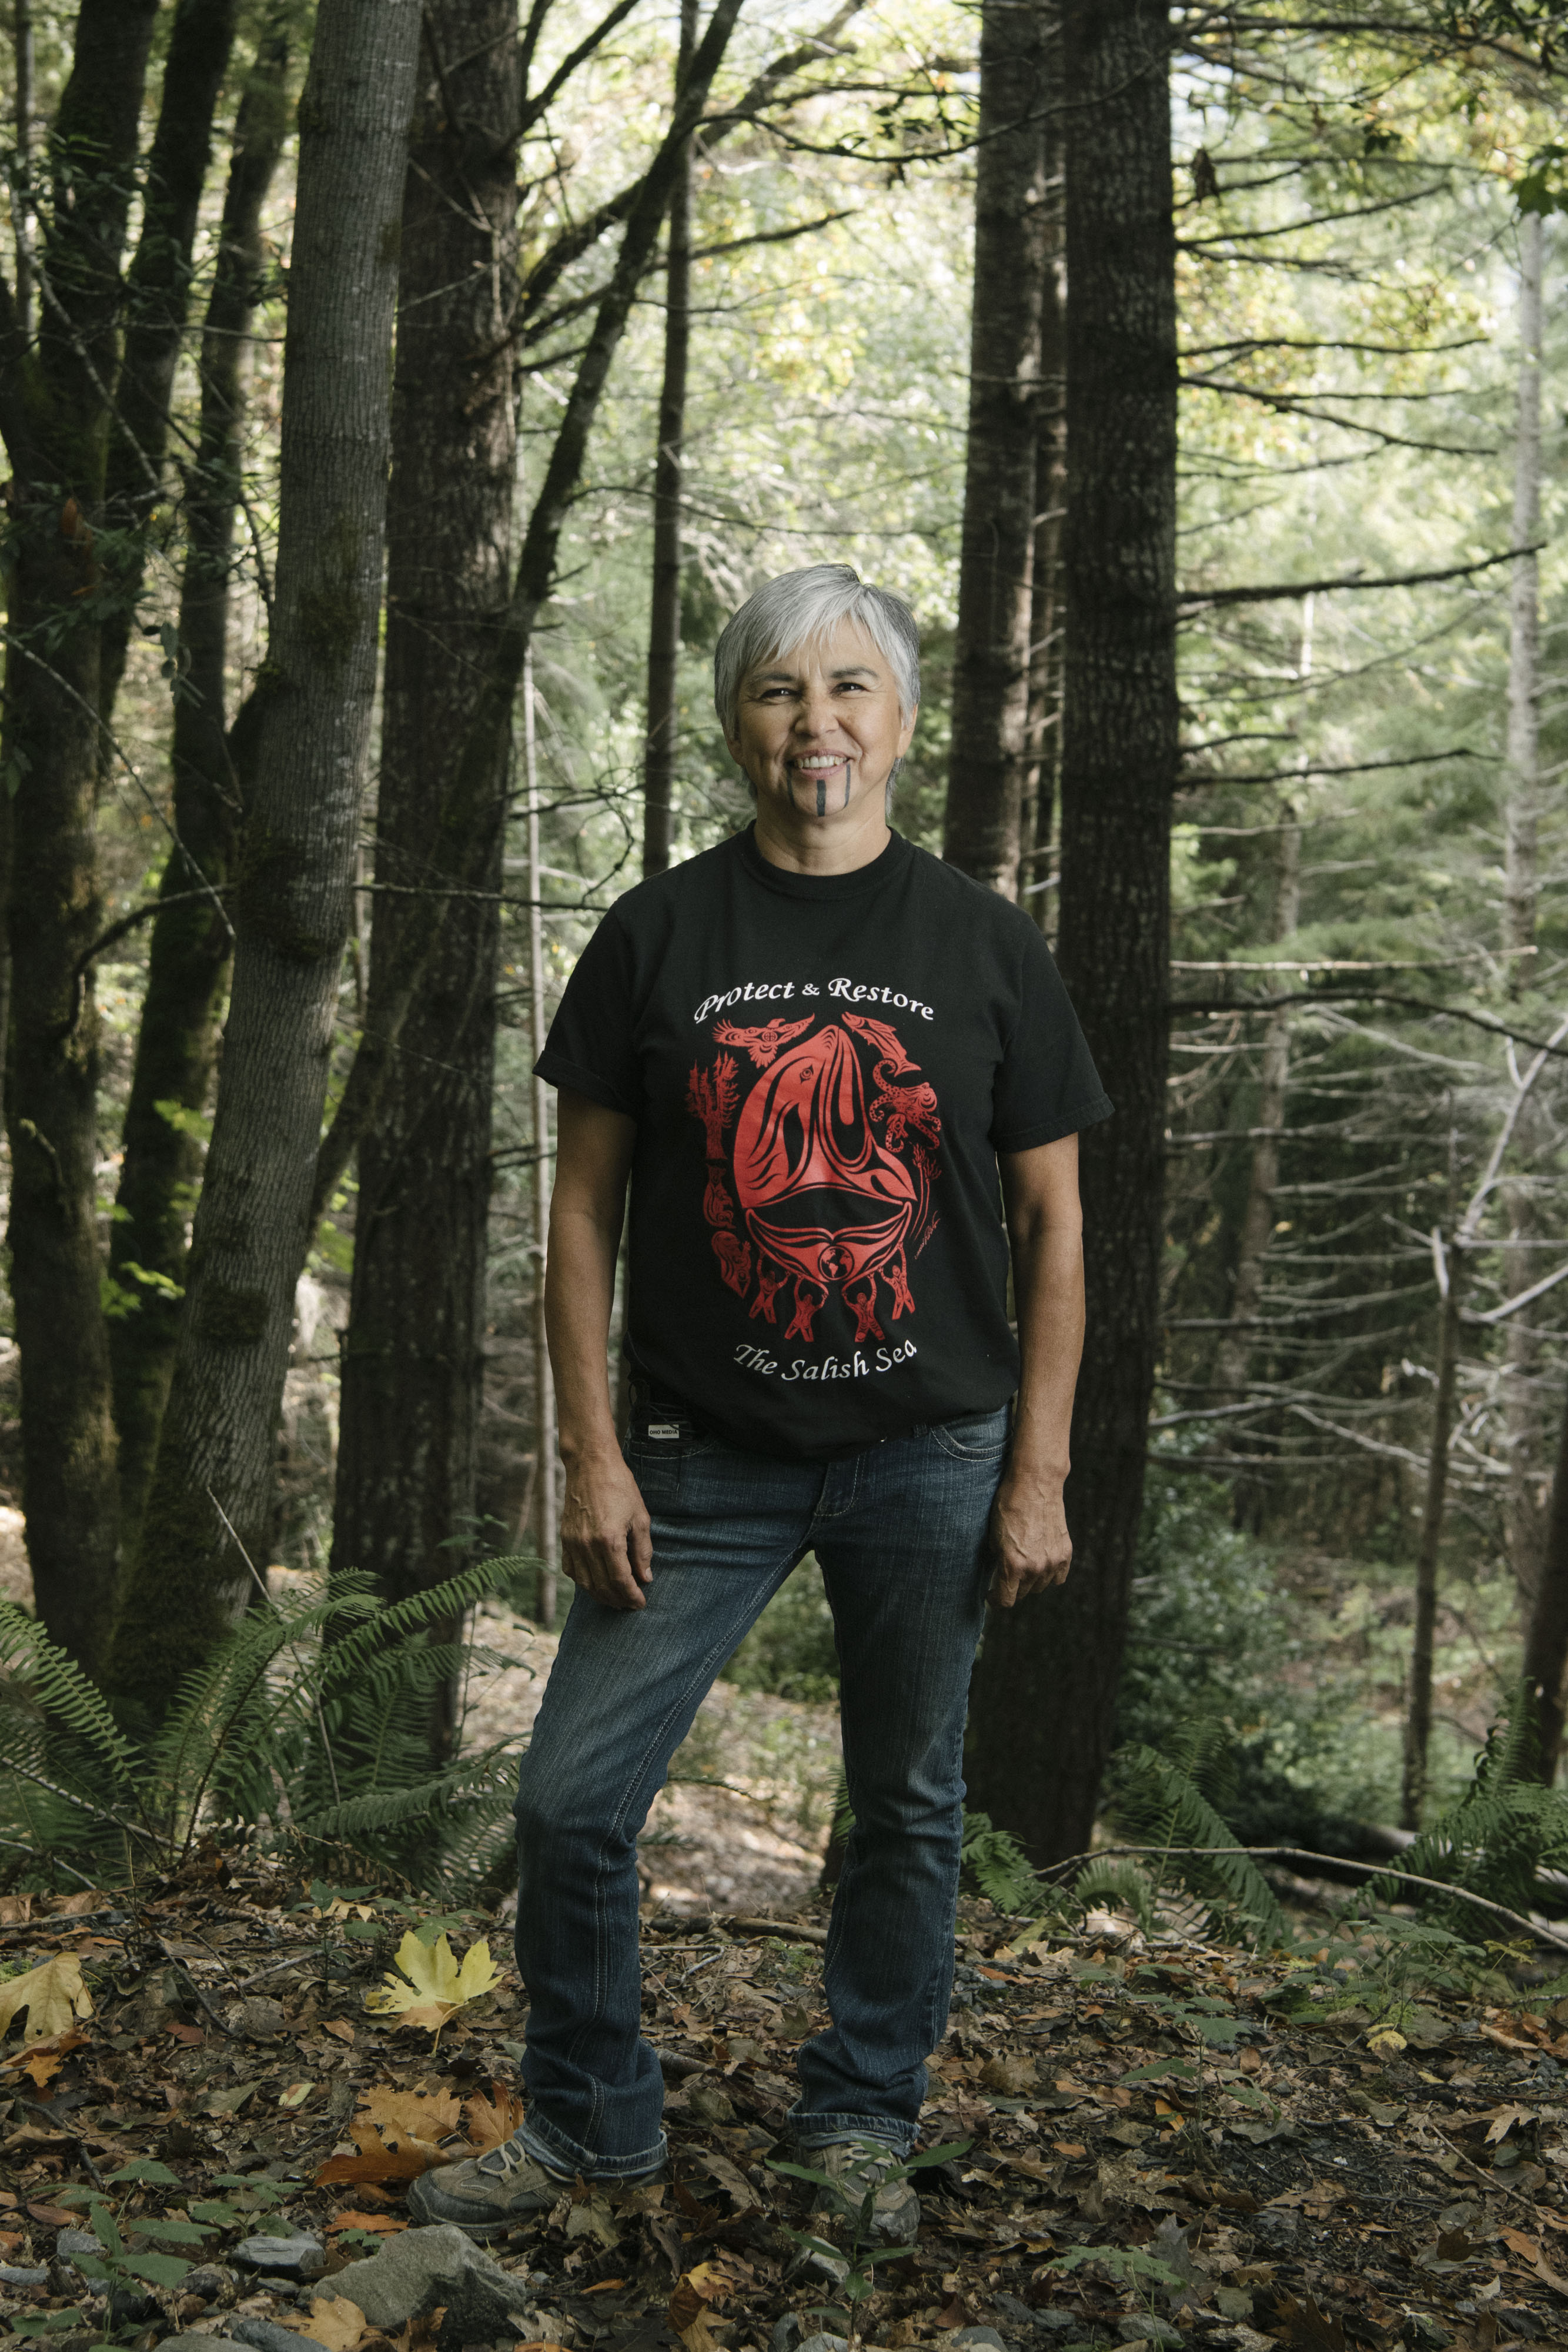 Woman in black t-shirt stands in forest.